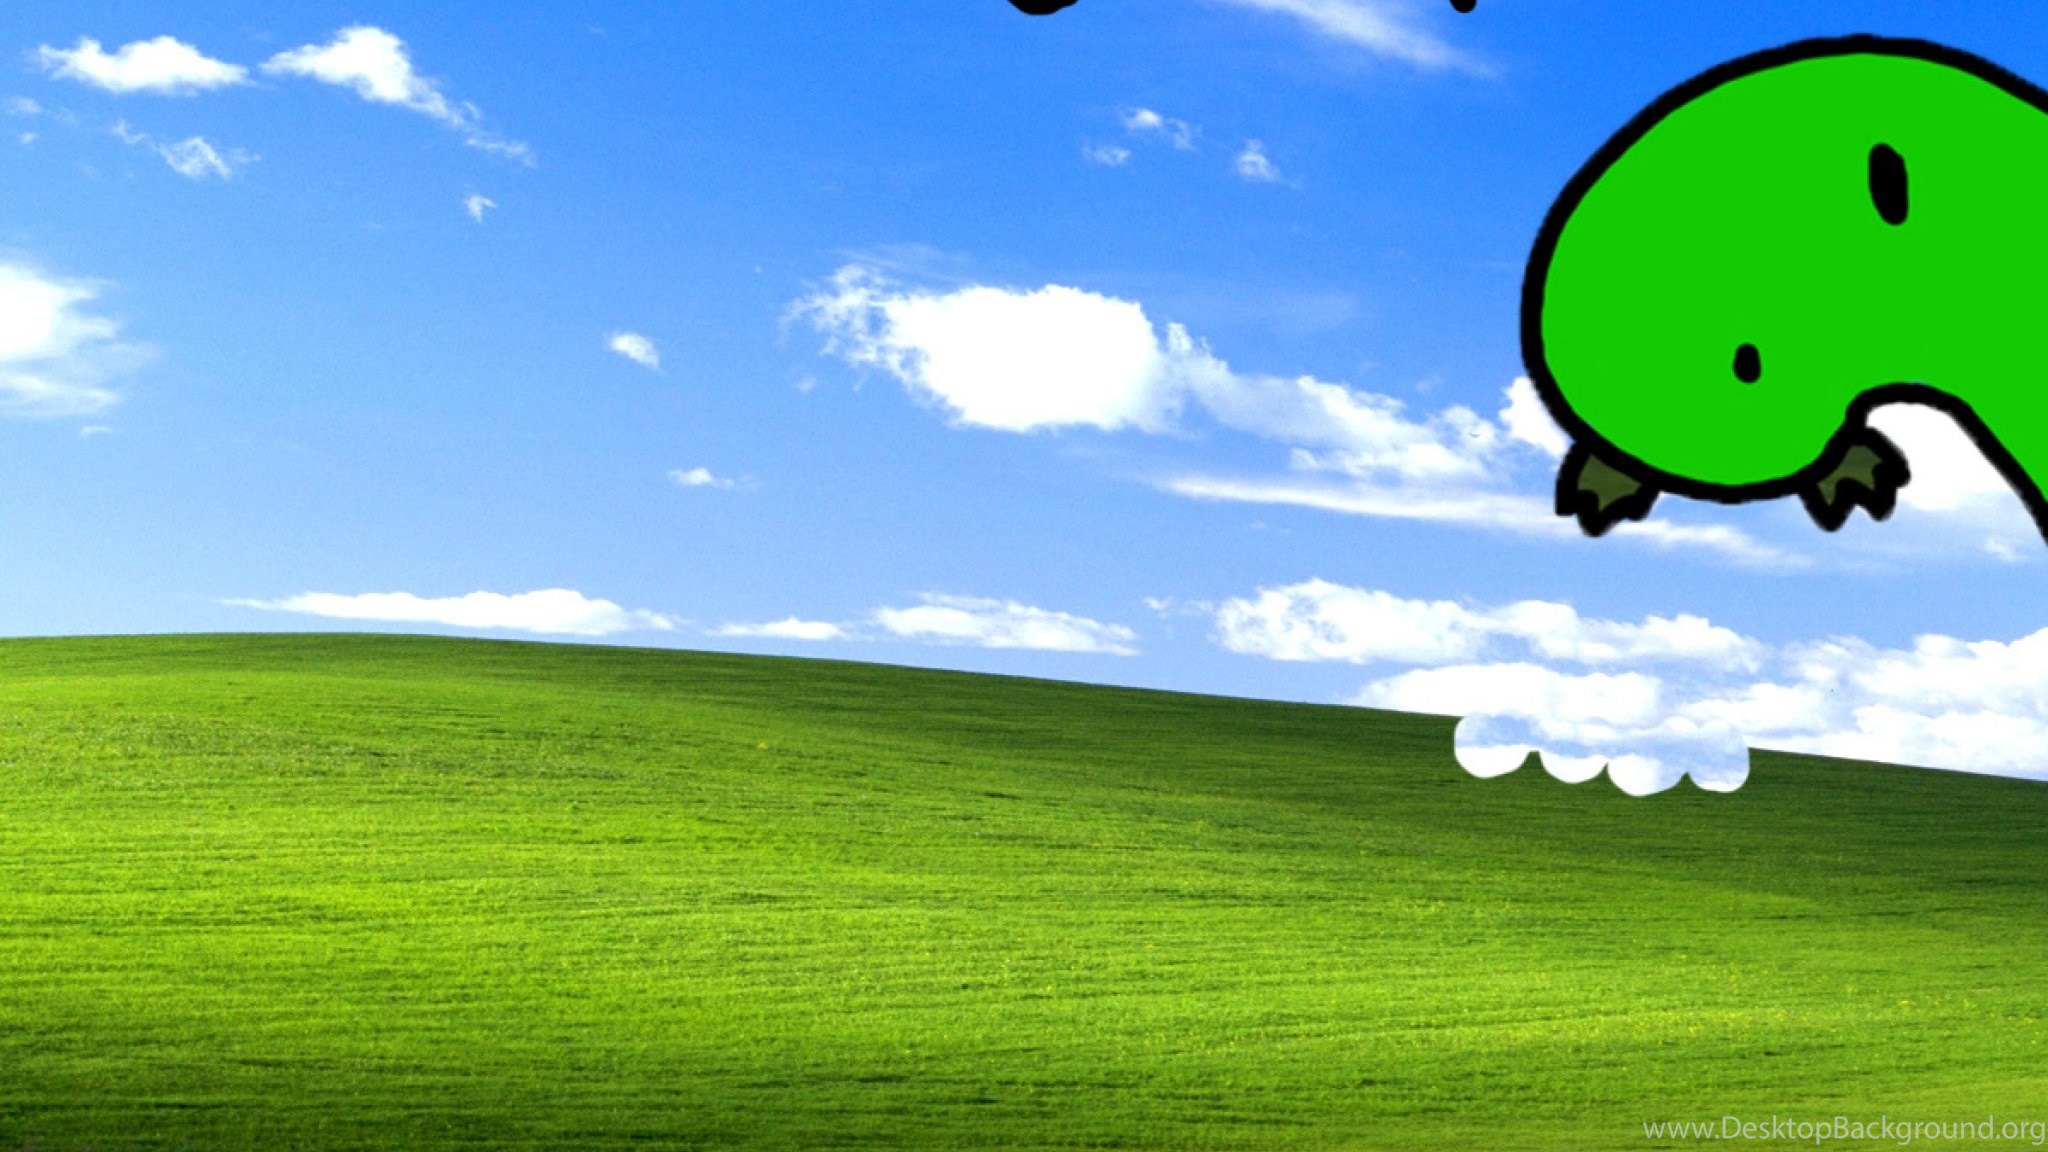 Download Funny Bliss Windows Xp iPad 3,4 & Air Wallpapers Widescreen Du...